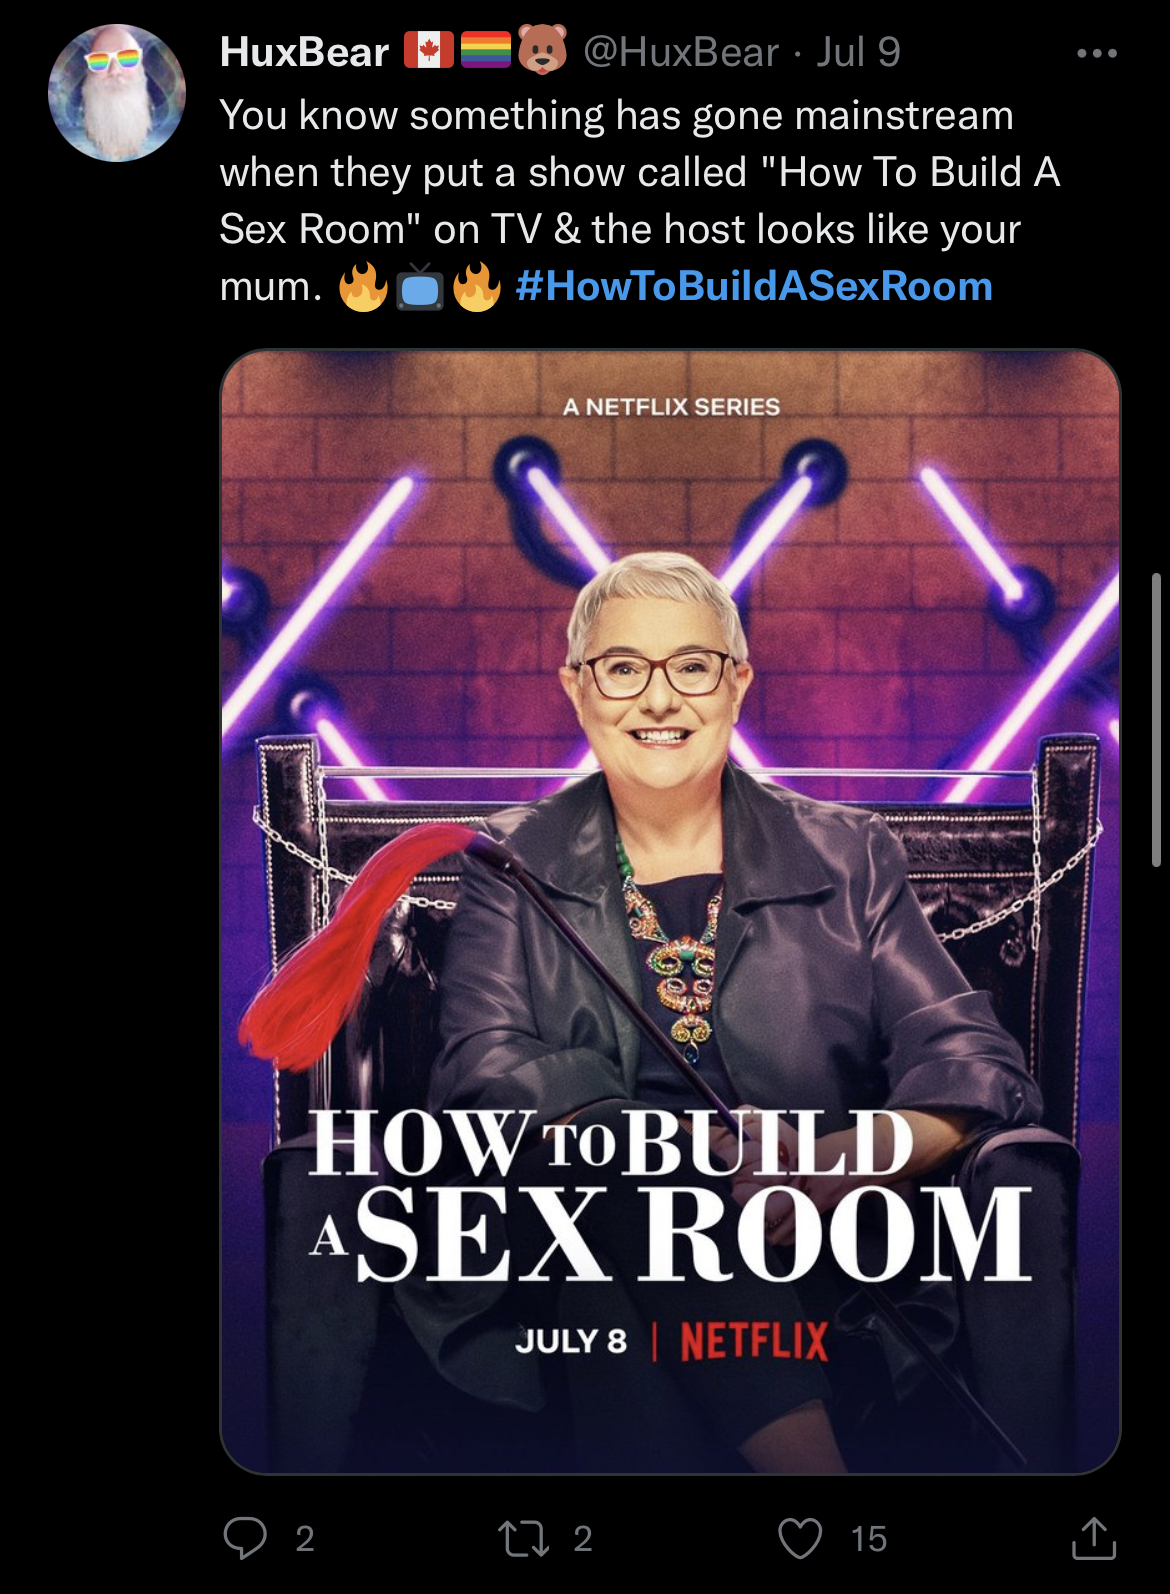 How To Build A Sex Room